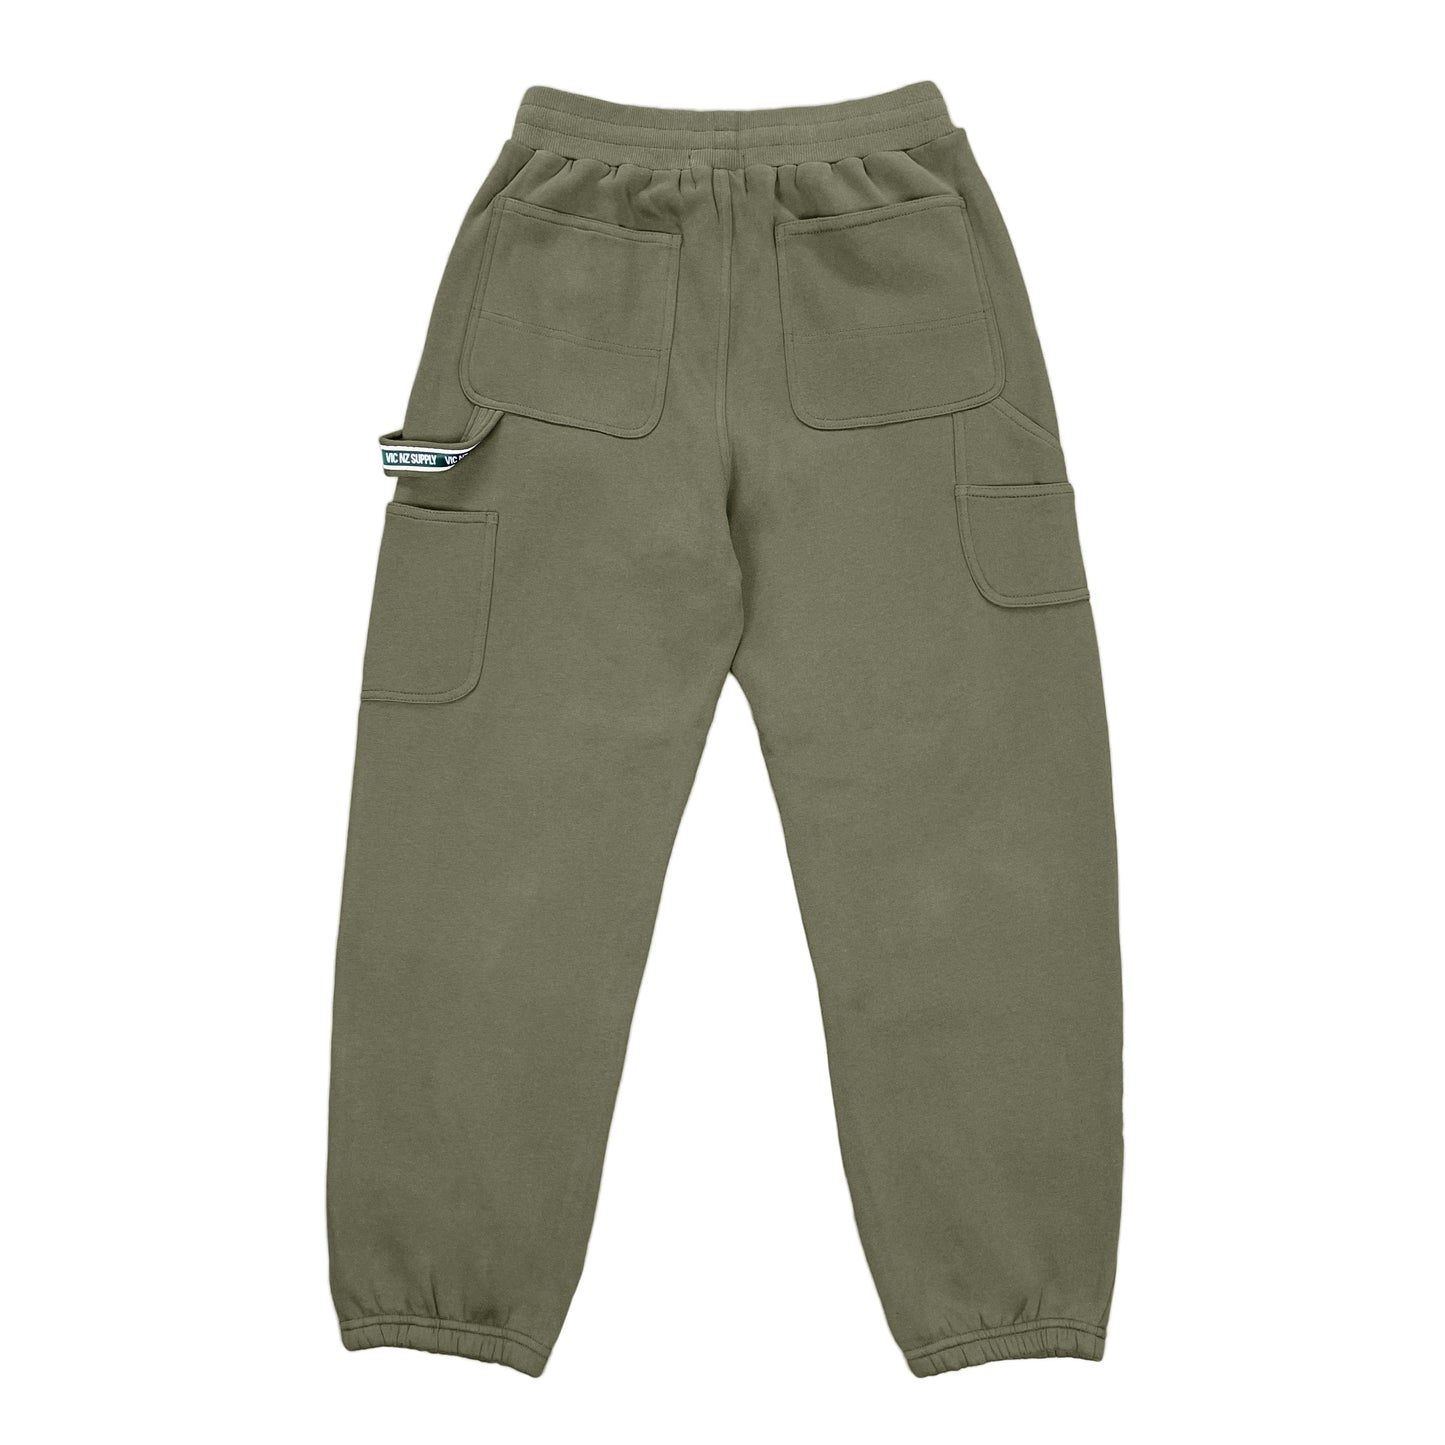 Experience the perfect blend of vintage workwear and comfort with our Carpenter Track Pants. Crafted from 100% cotton at a substantial 350 GSM weight, these heavyweight pants feature a front knee patch, elastic waistband with a drawstring, utility pockets, and a classic hammer loop. Elevate your style with durability and authenticity in every detail.